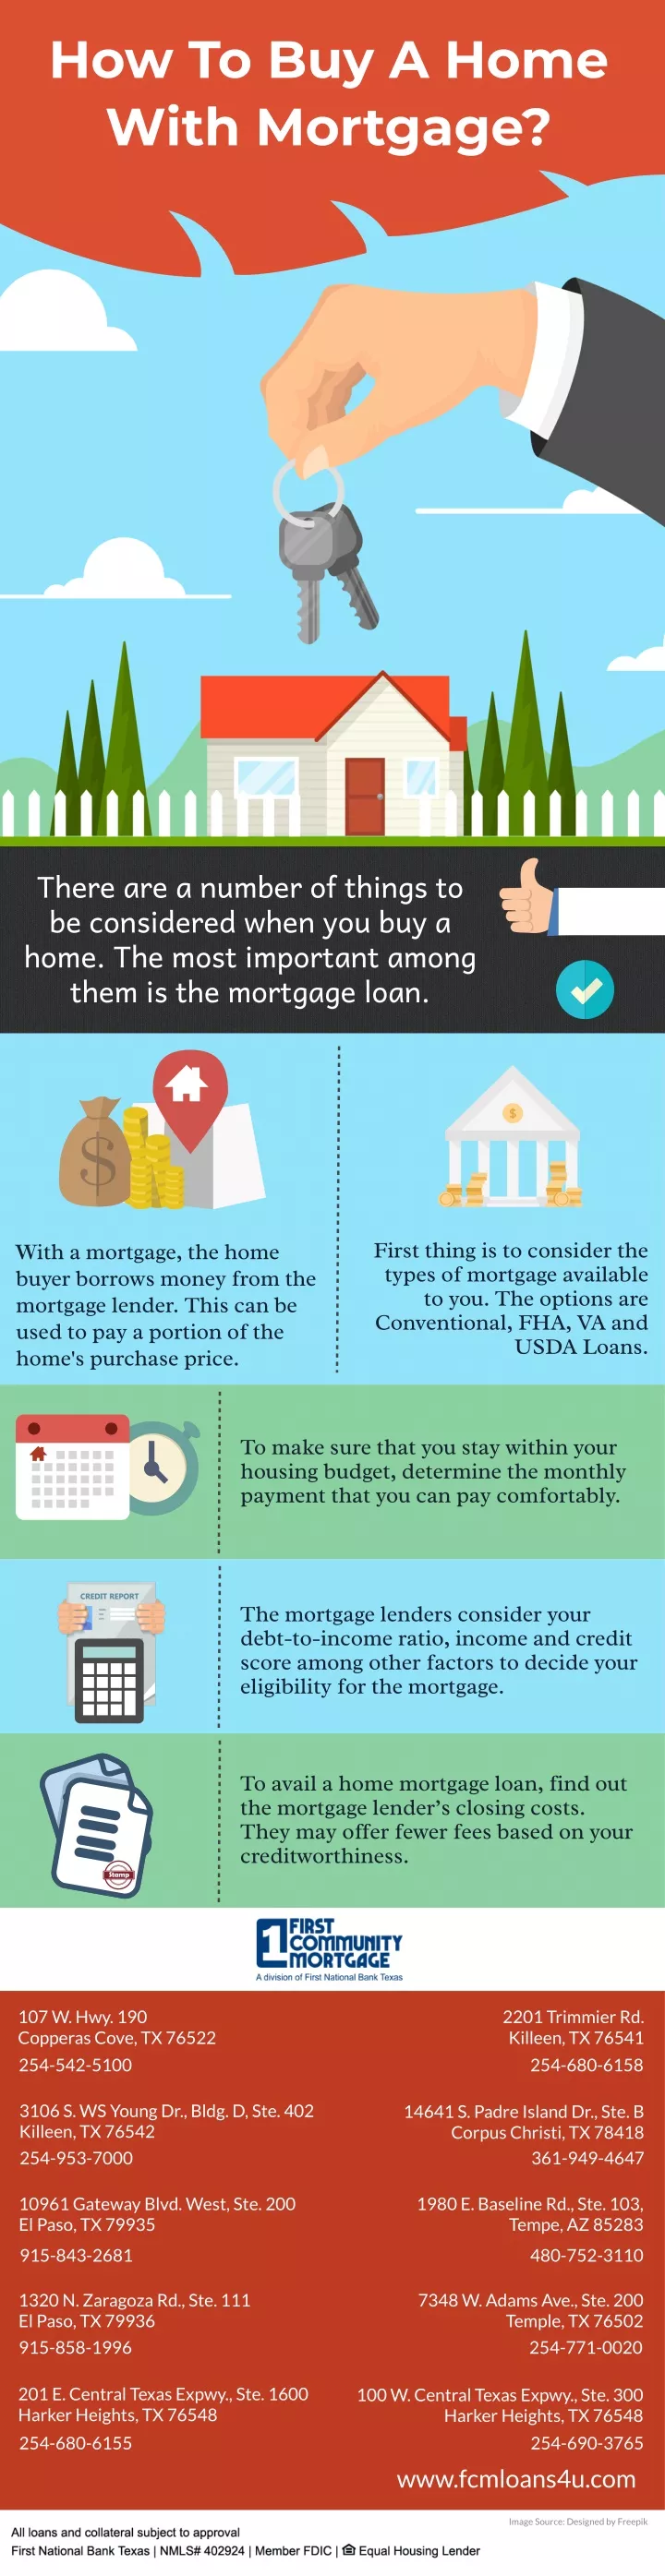 how to buy a home with mortgage